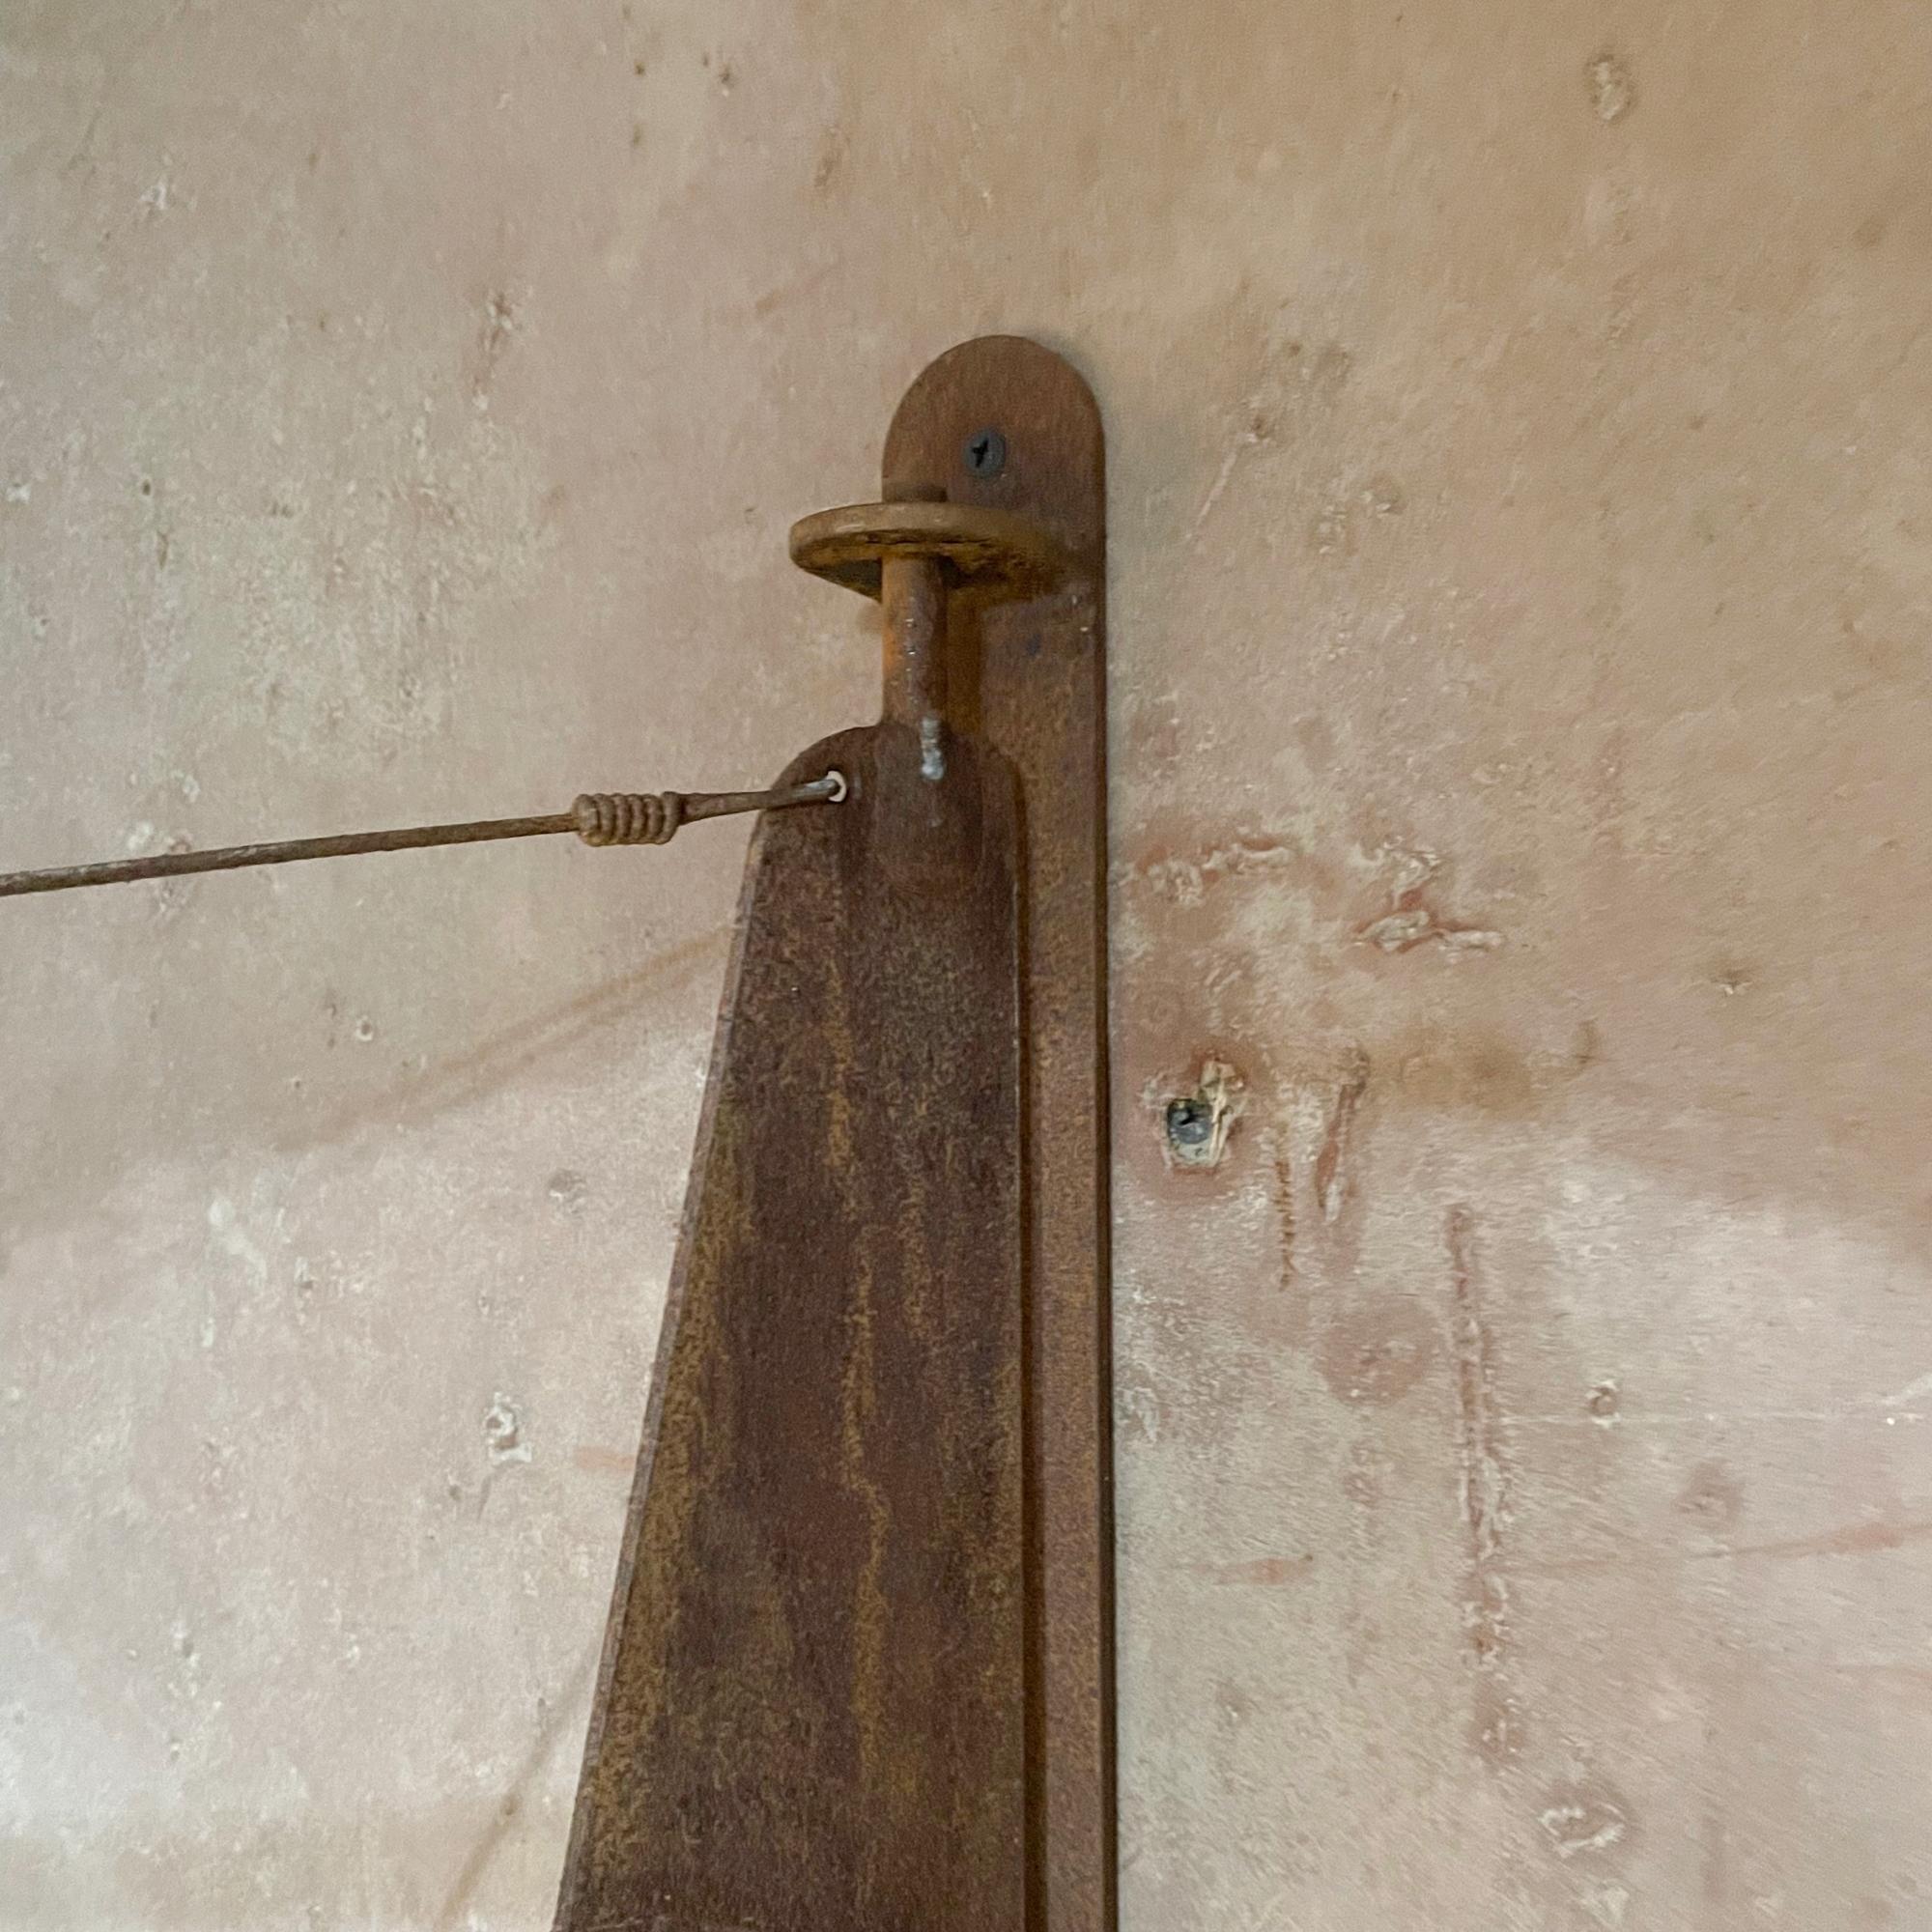 French Industrial Wall Sconce Style of Jean Prouve Potence Pivot Swing Arm Light In Good Condition For Sale In Chula Vista, CA